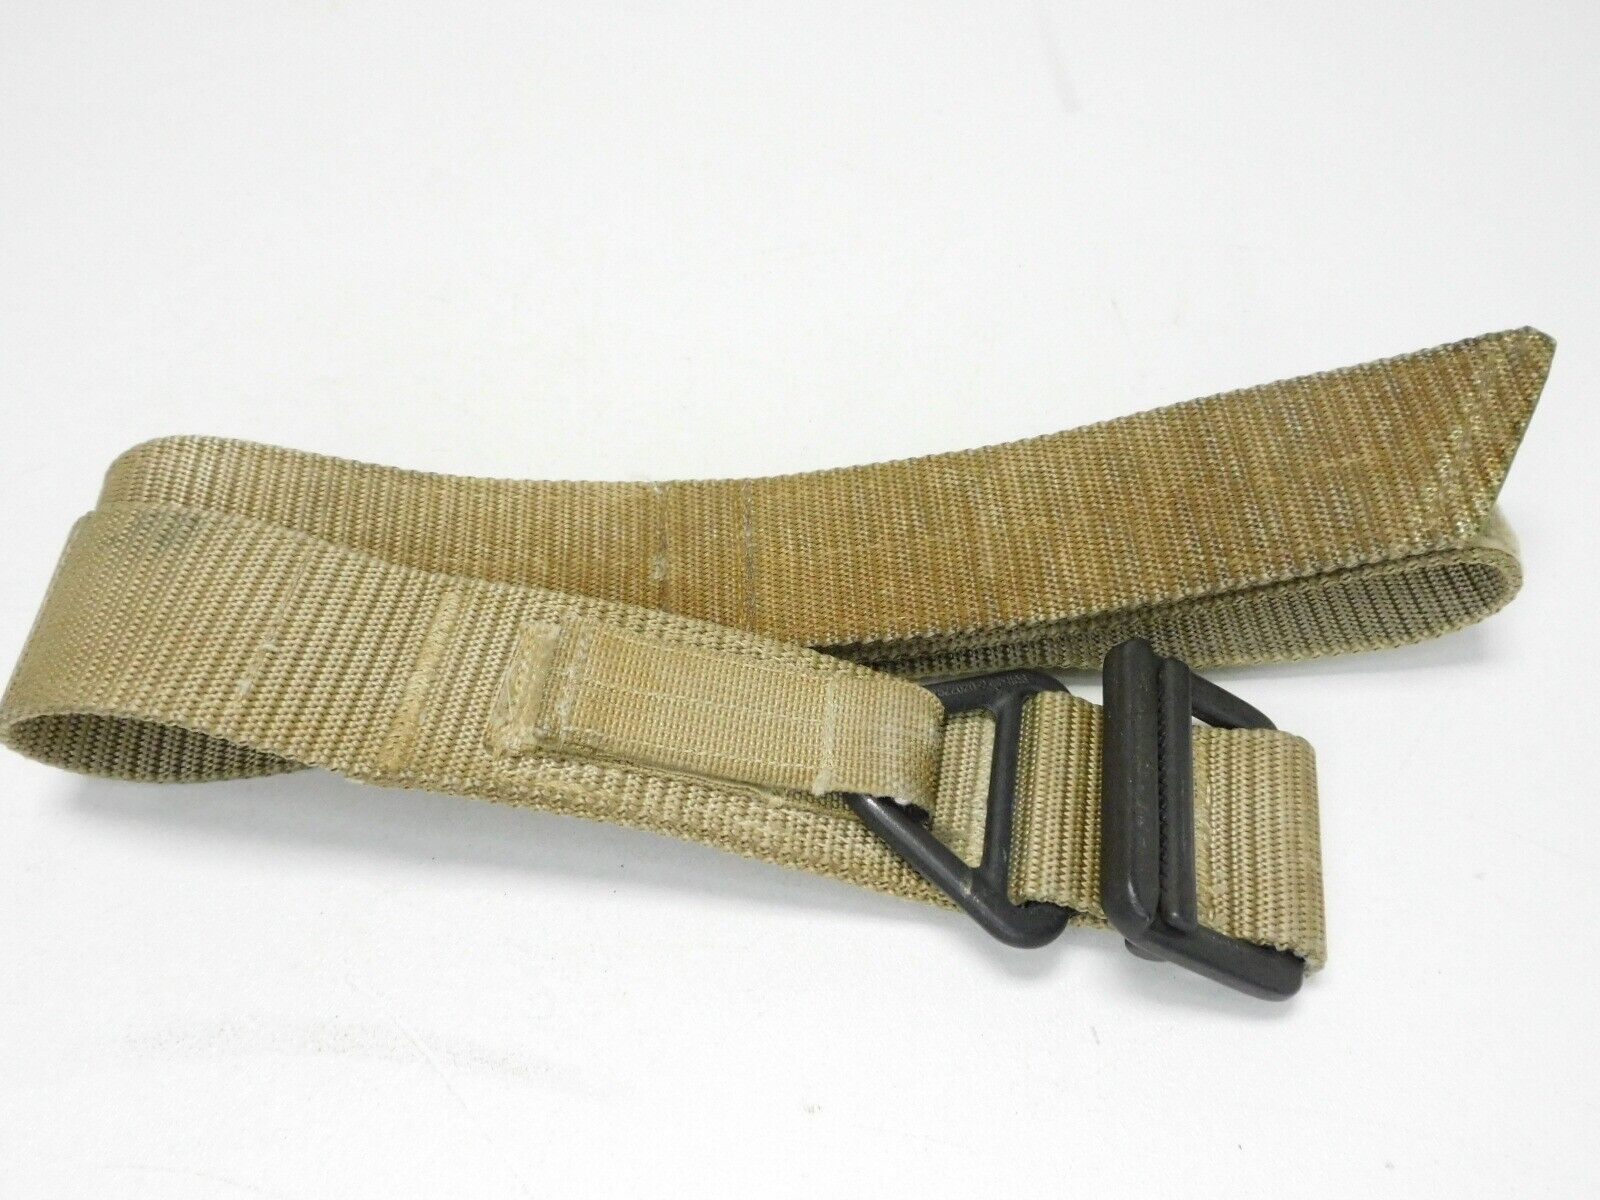 Spec-OPS Tan Military Tactical Riggers Belt 432-943-4888 Heavy Duty Size 39\